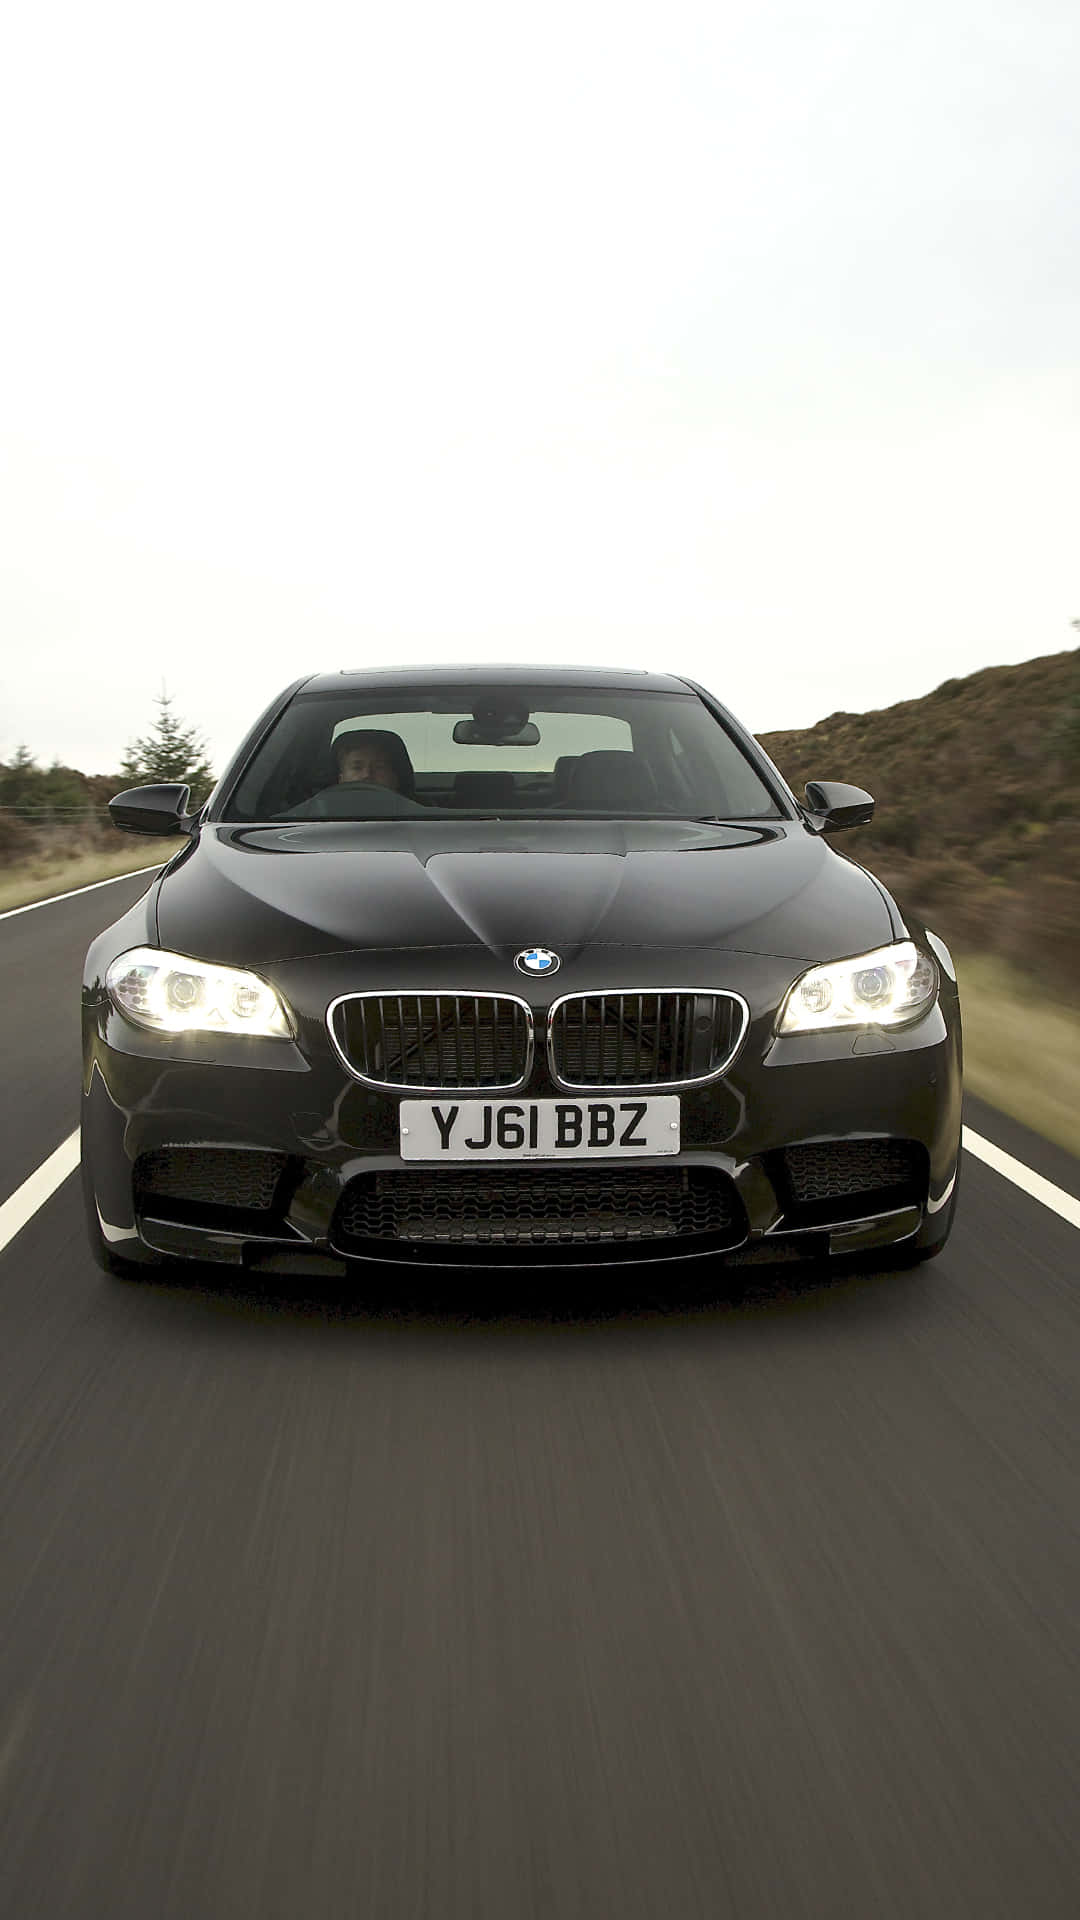 "Experience the luxury of driving a BMW M5 in breathtaking 4K detail" Wallpaper